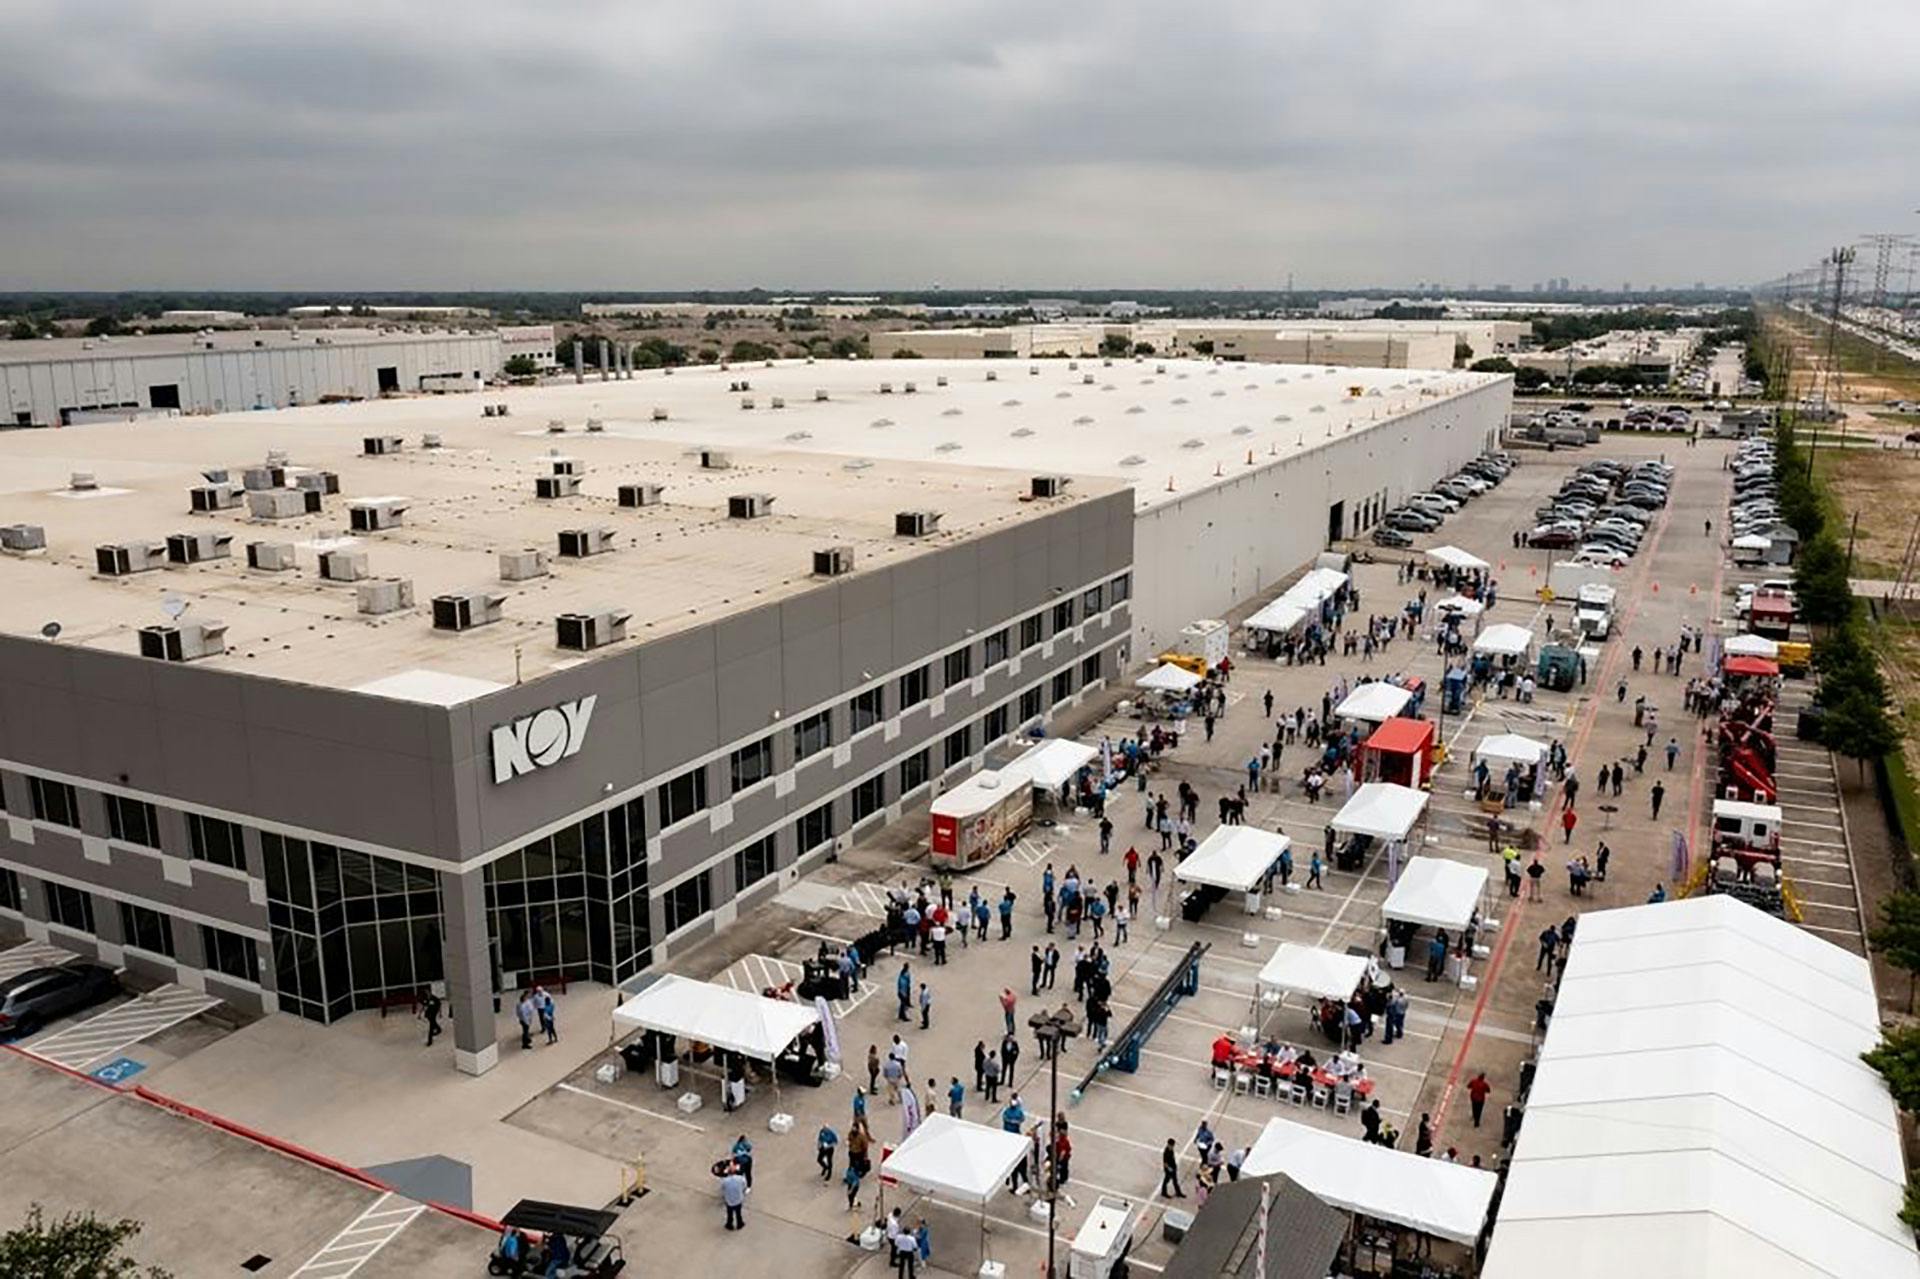 Aerial shot of tents and people outside of an NOV facility during the customer showcase